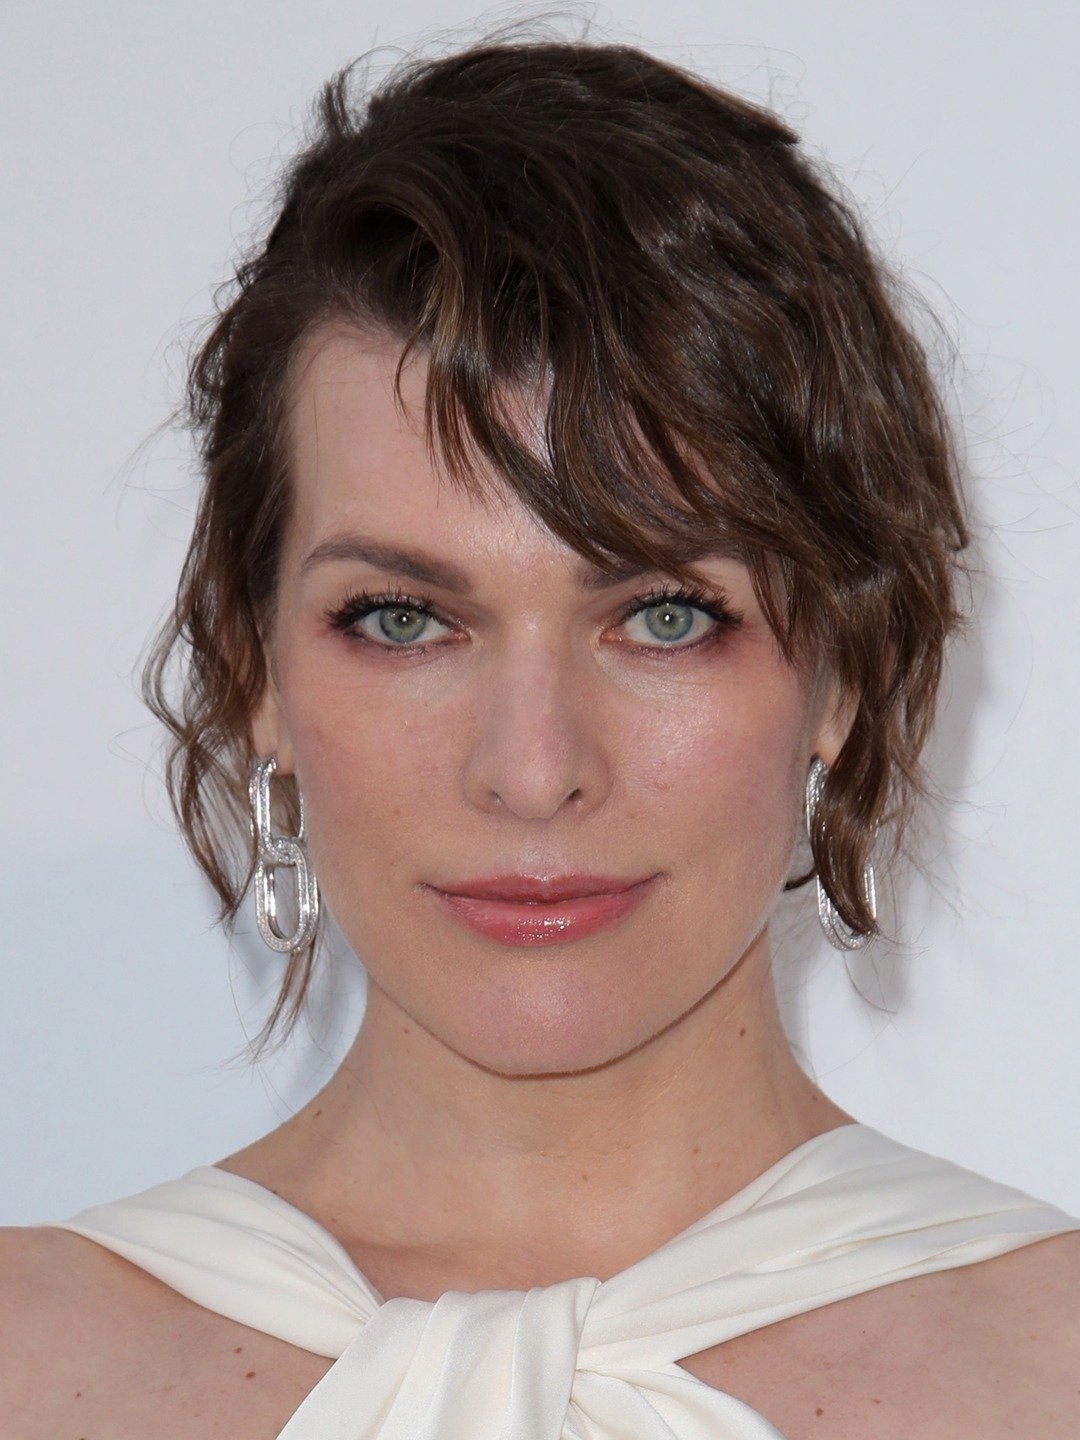 Resident Evil: Why Did Milla Jovovich Stop Playing Alice & Will She Return?